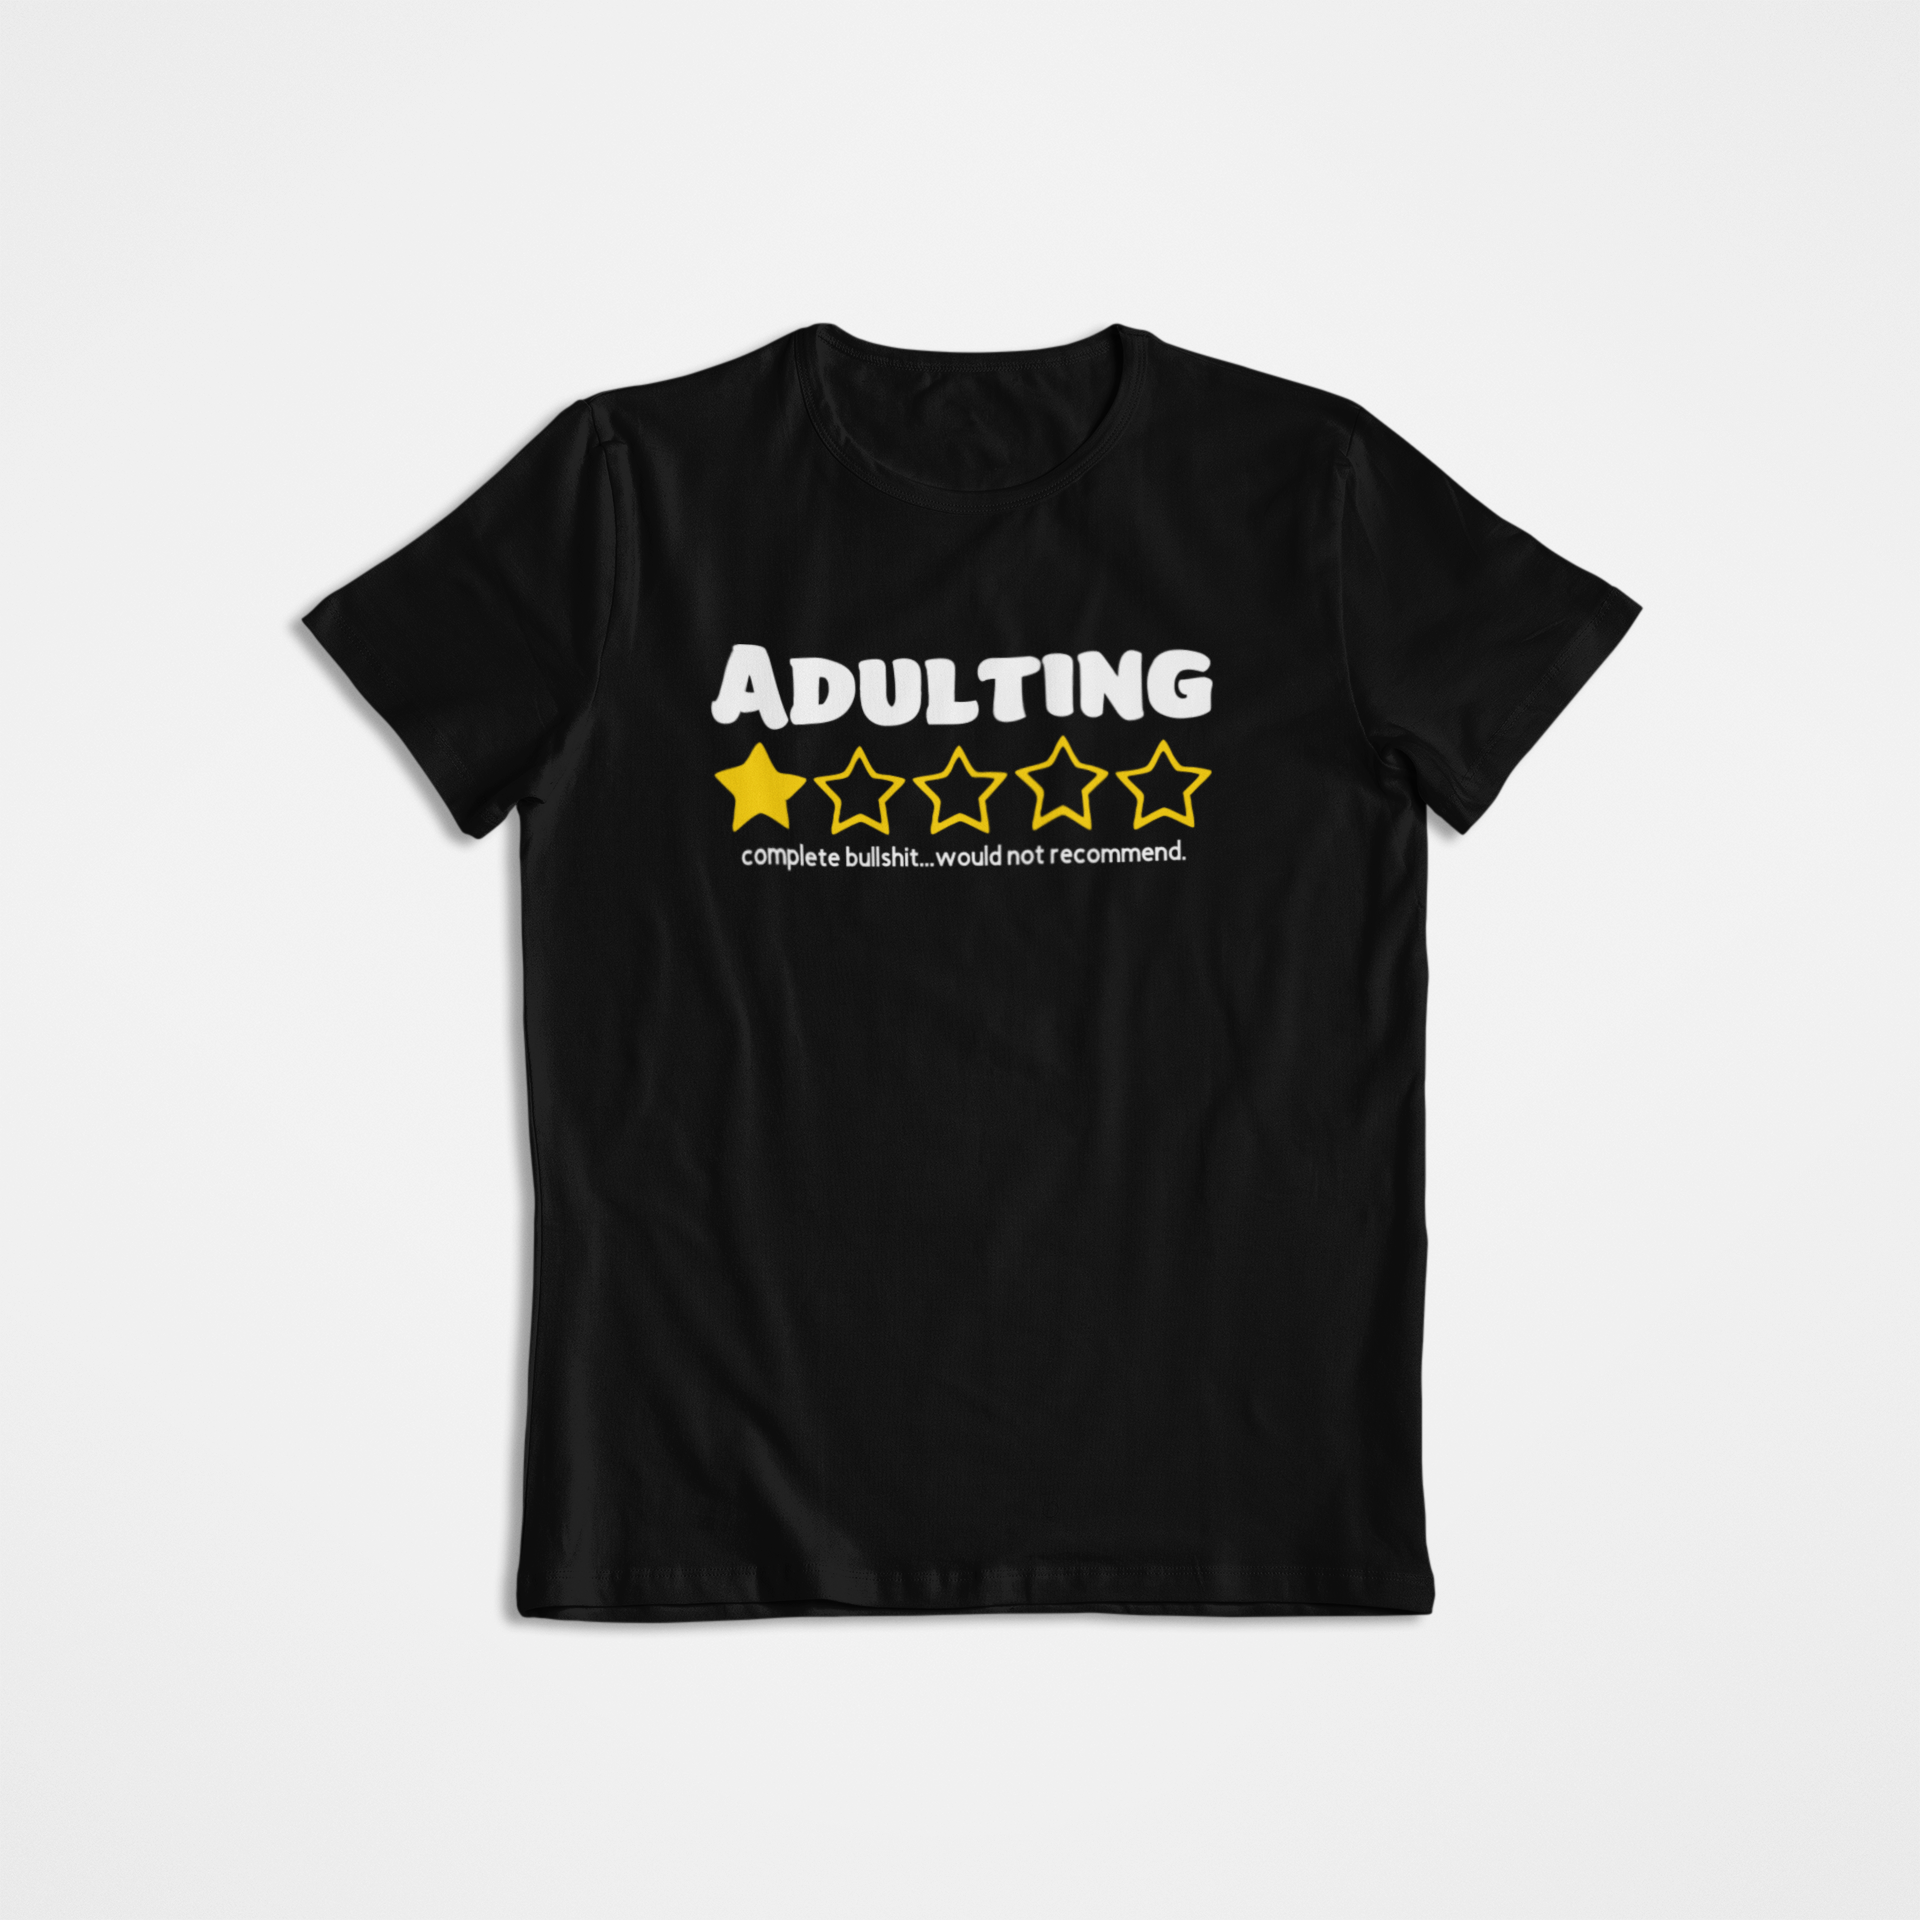 Black Teeshirt with Adulting 1 star complete bullshit would not recommend on the front